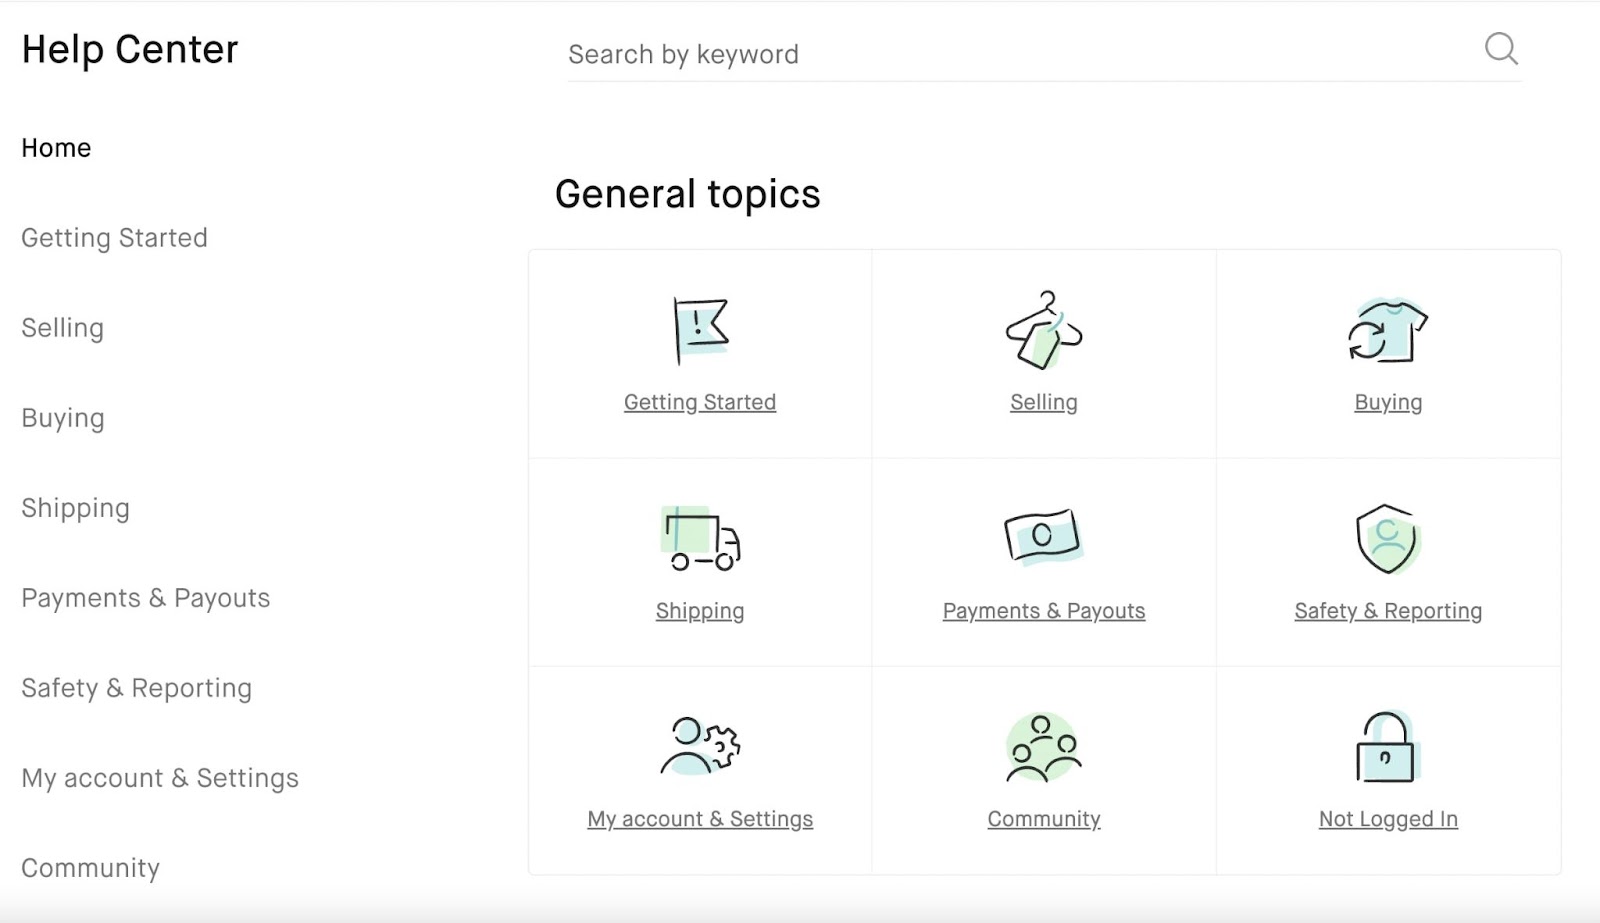 Vinted’s Help Center with "General topics" page opened